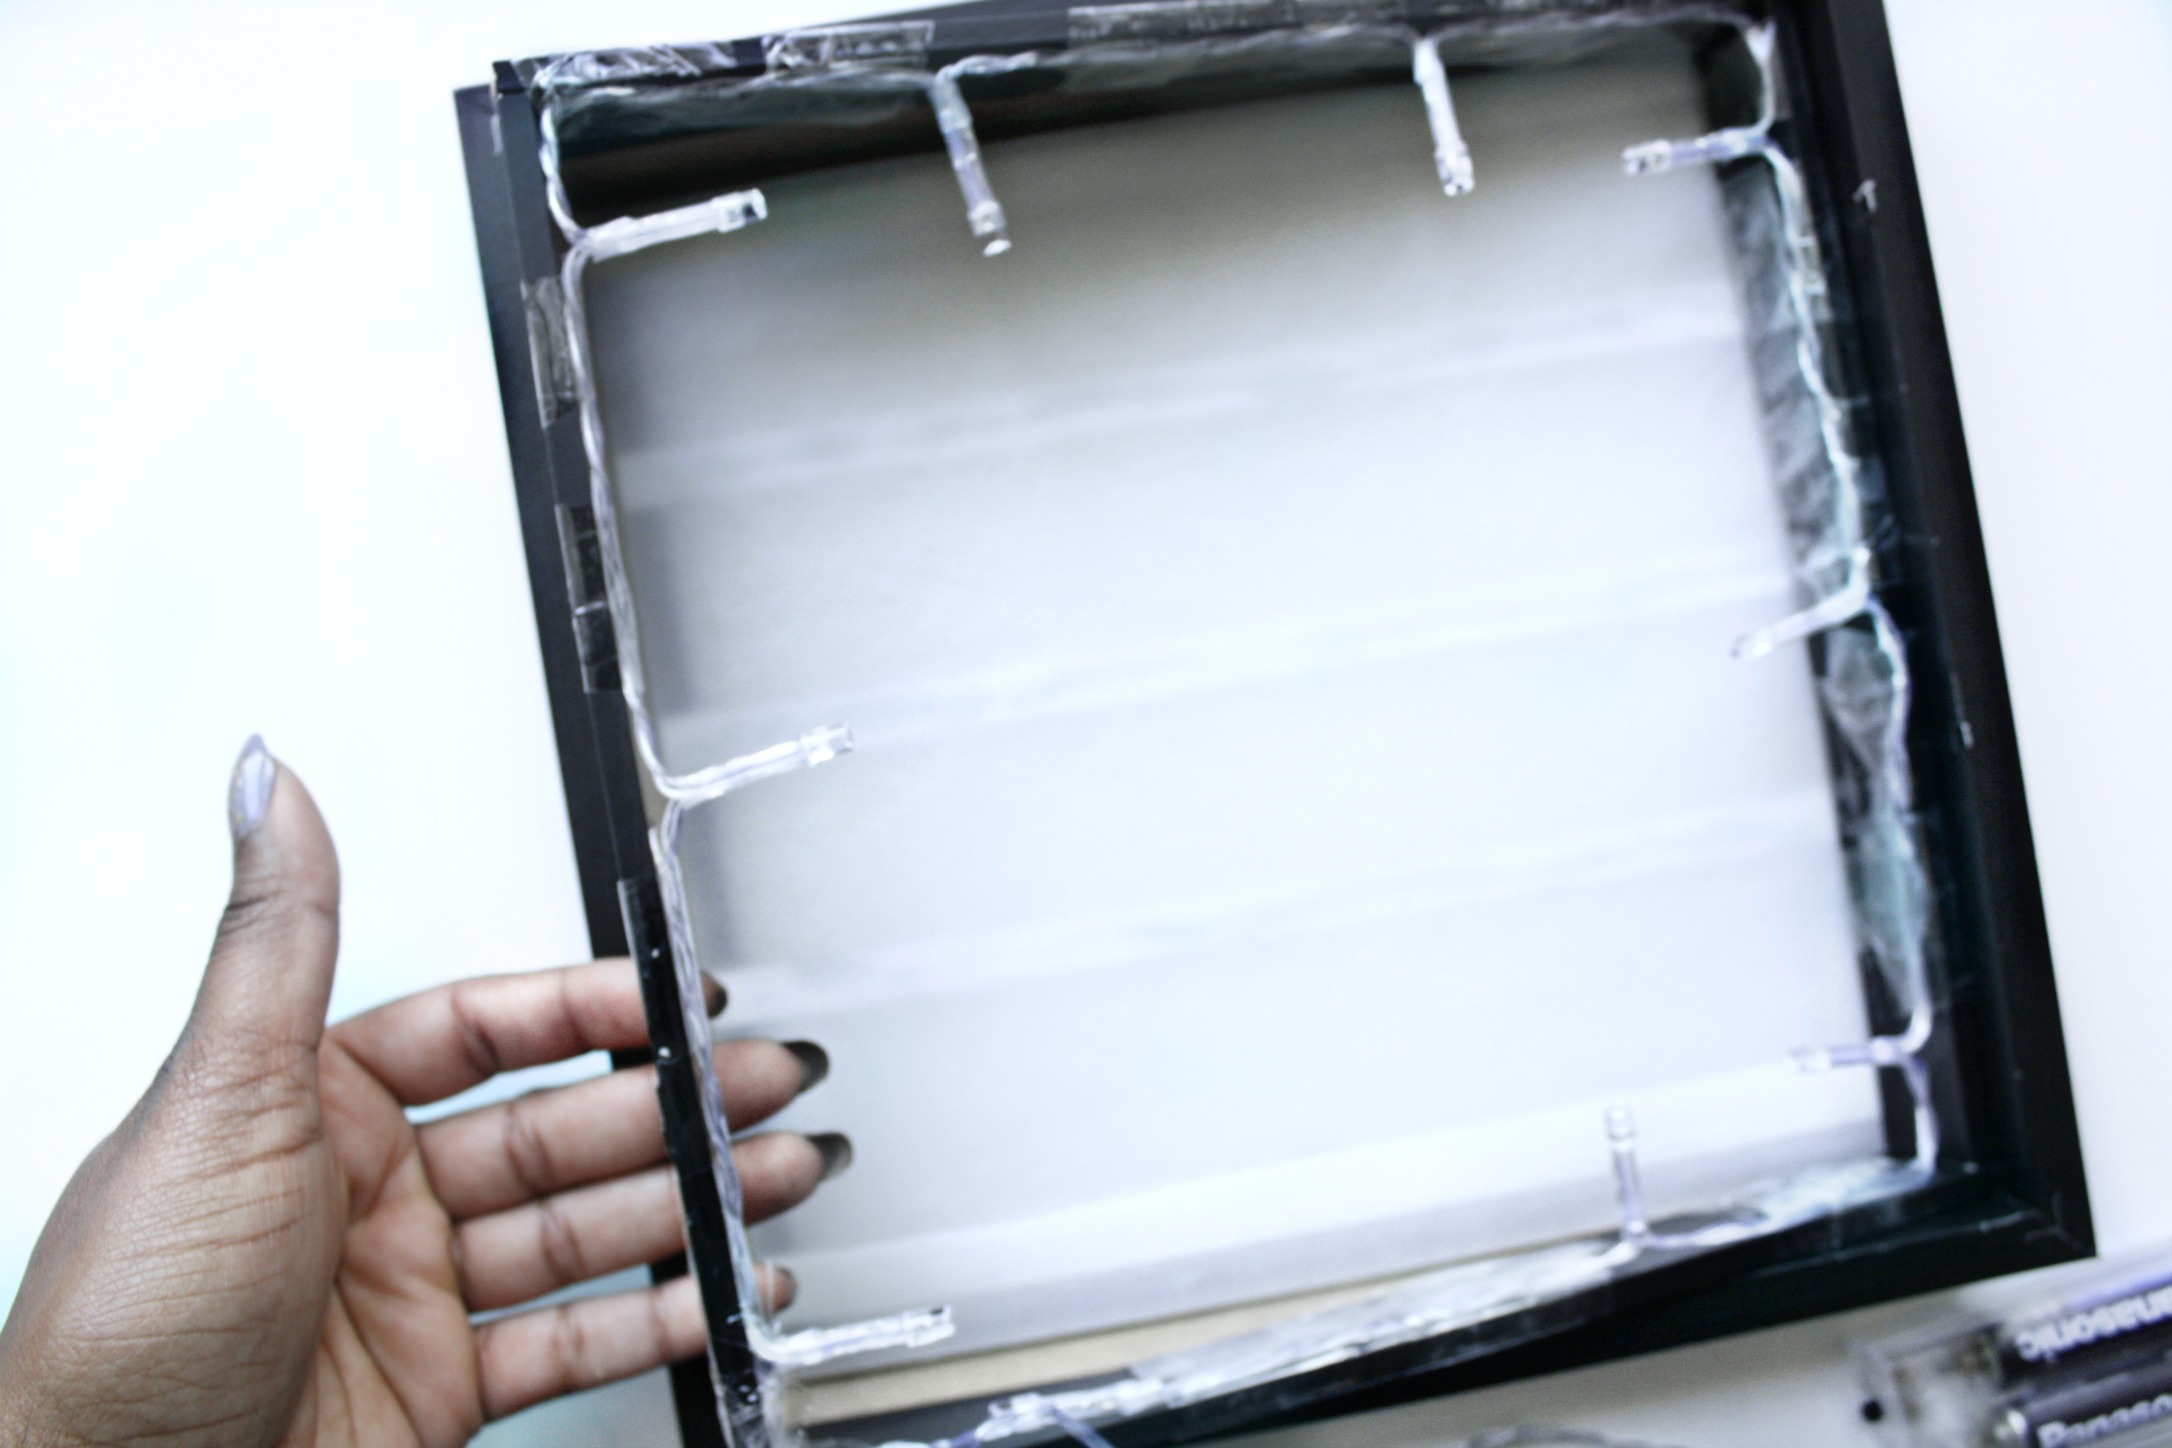 DIY Project: How To Make your own Cinema Light Box for Under $30